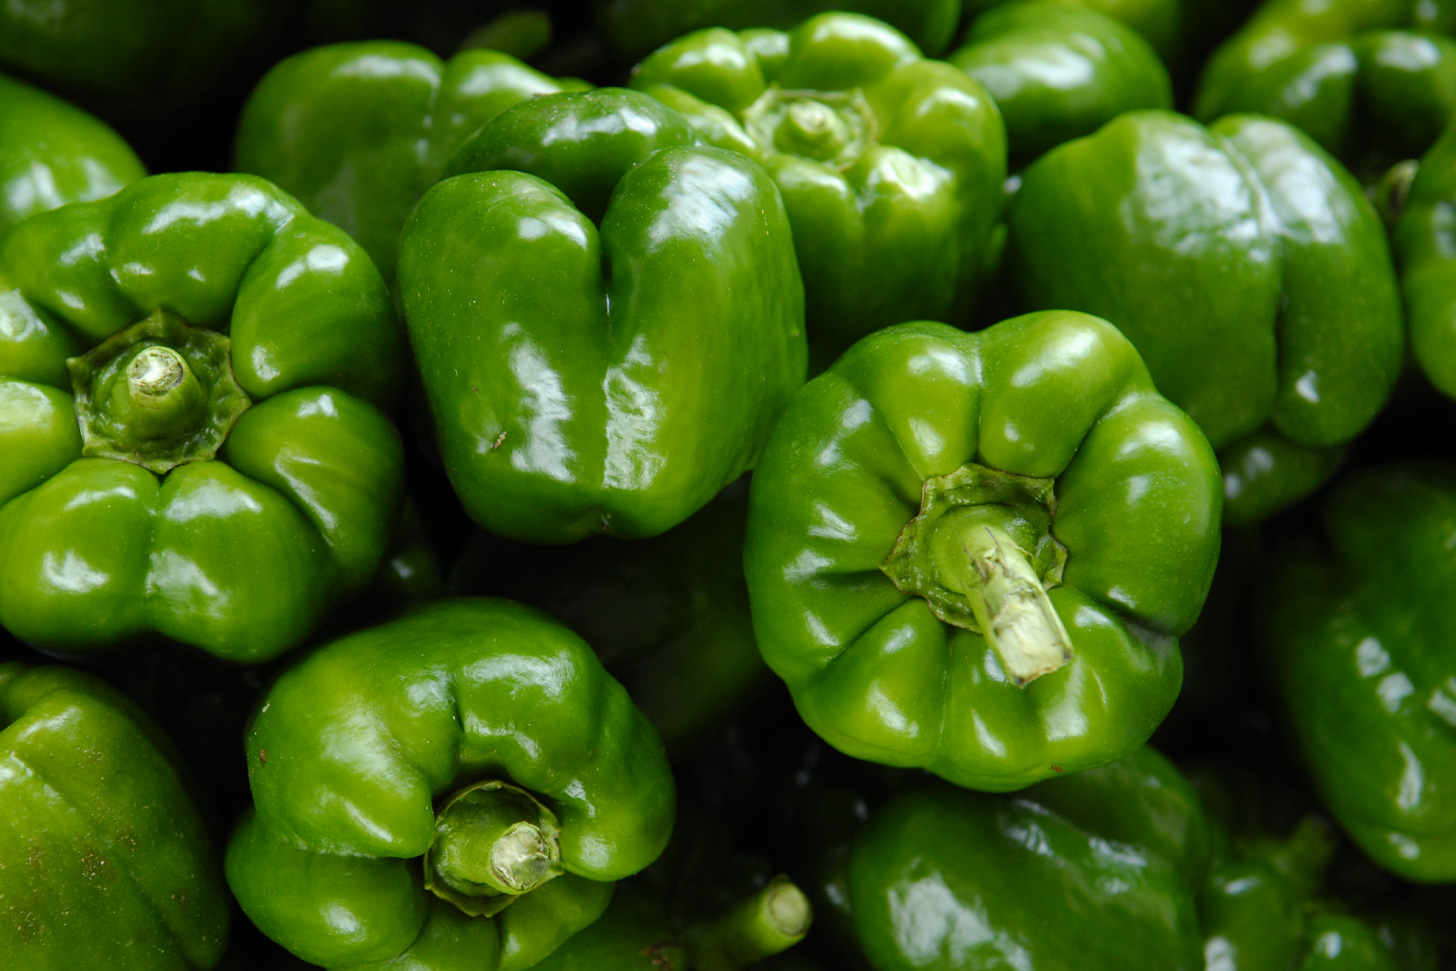 Several green peppers are lying in a pile.